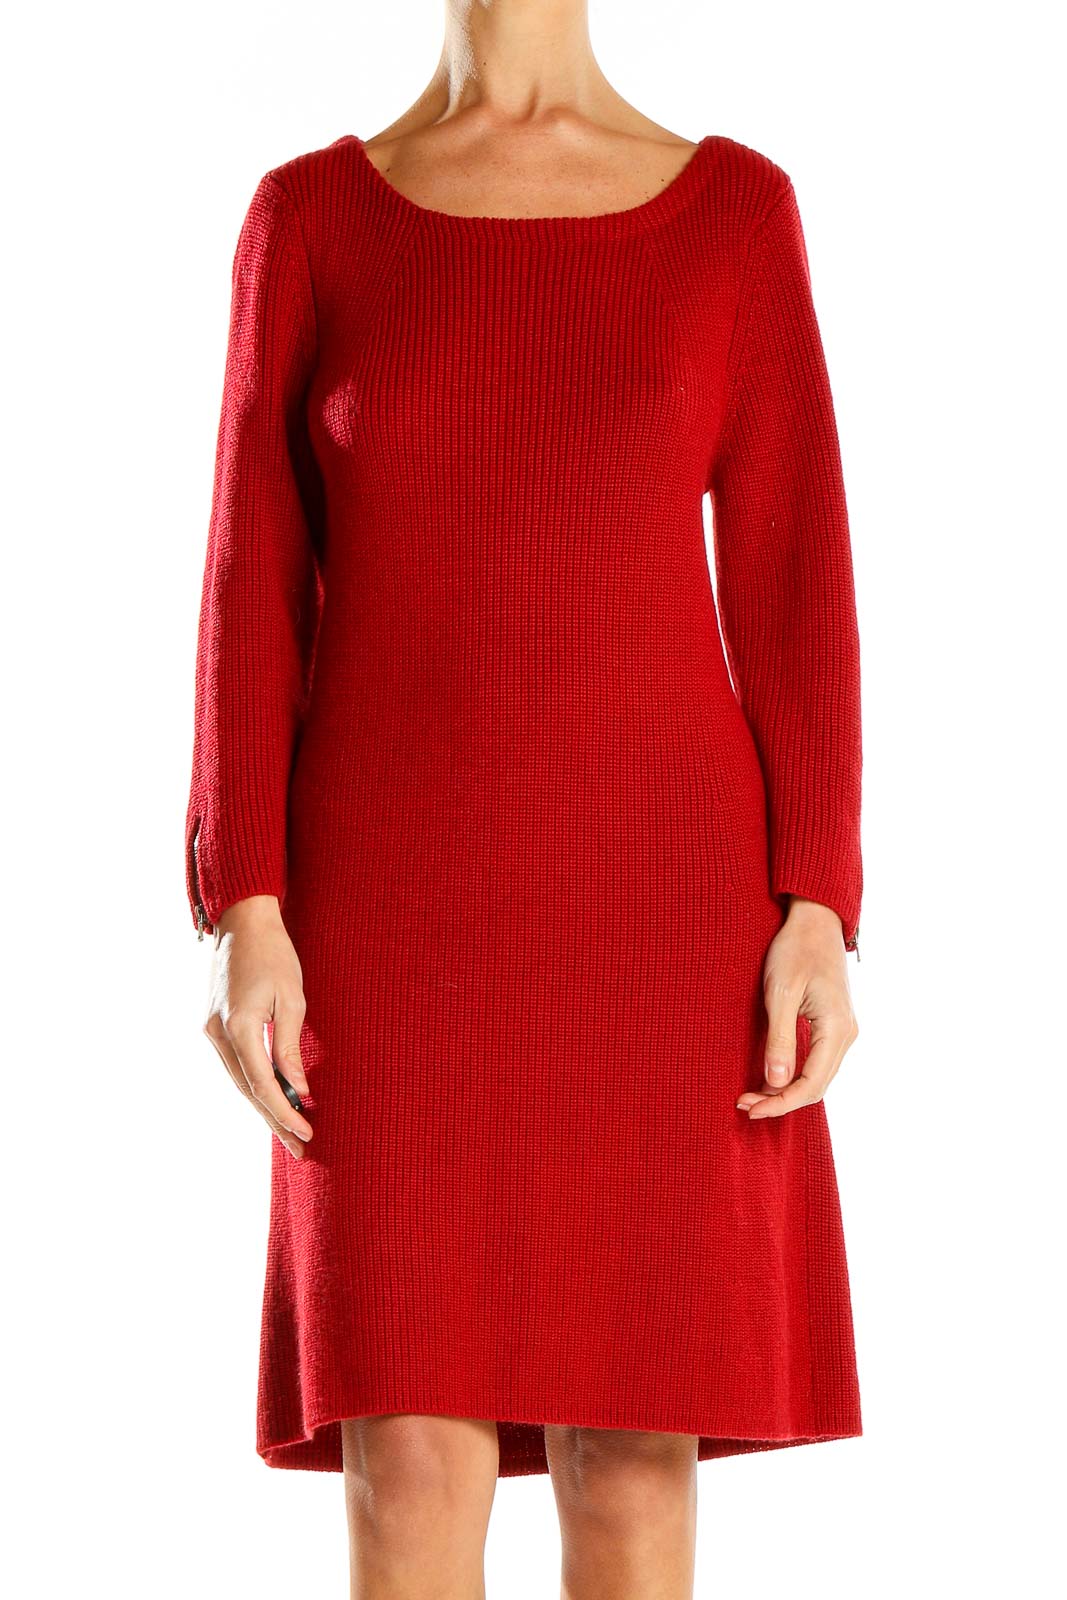 Red Knit Classic A-Line Dress Front